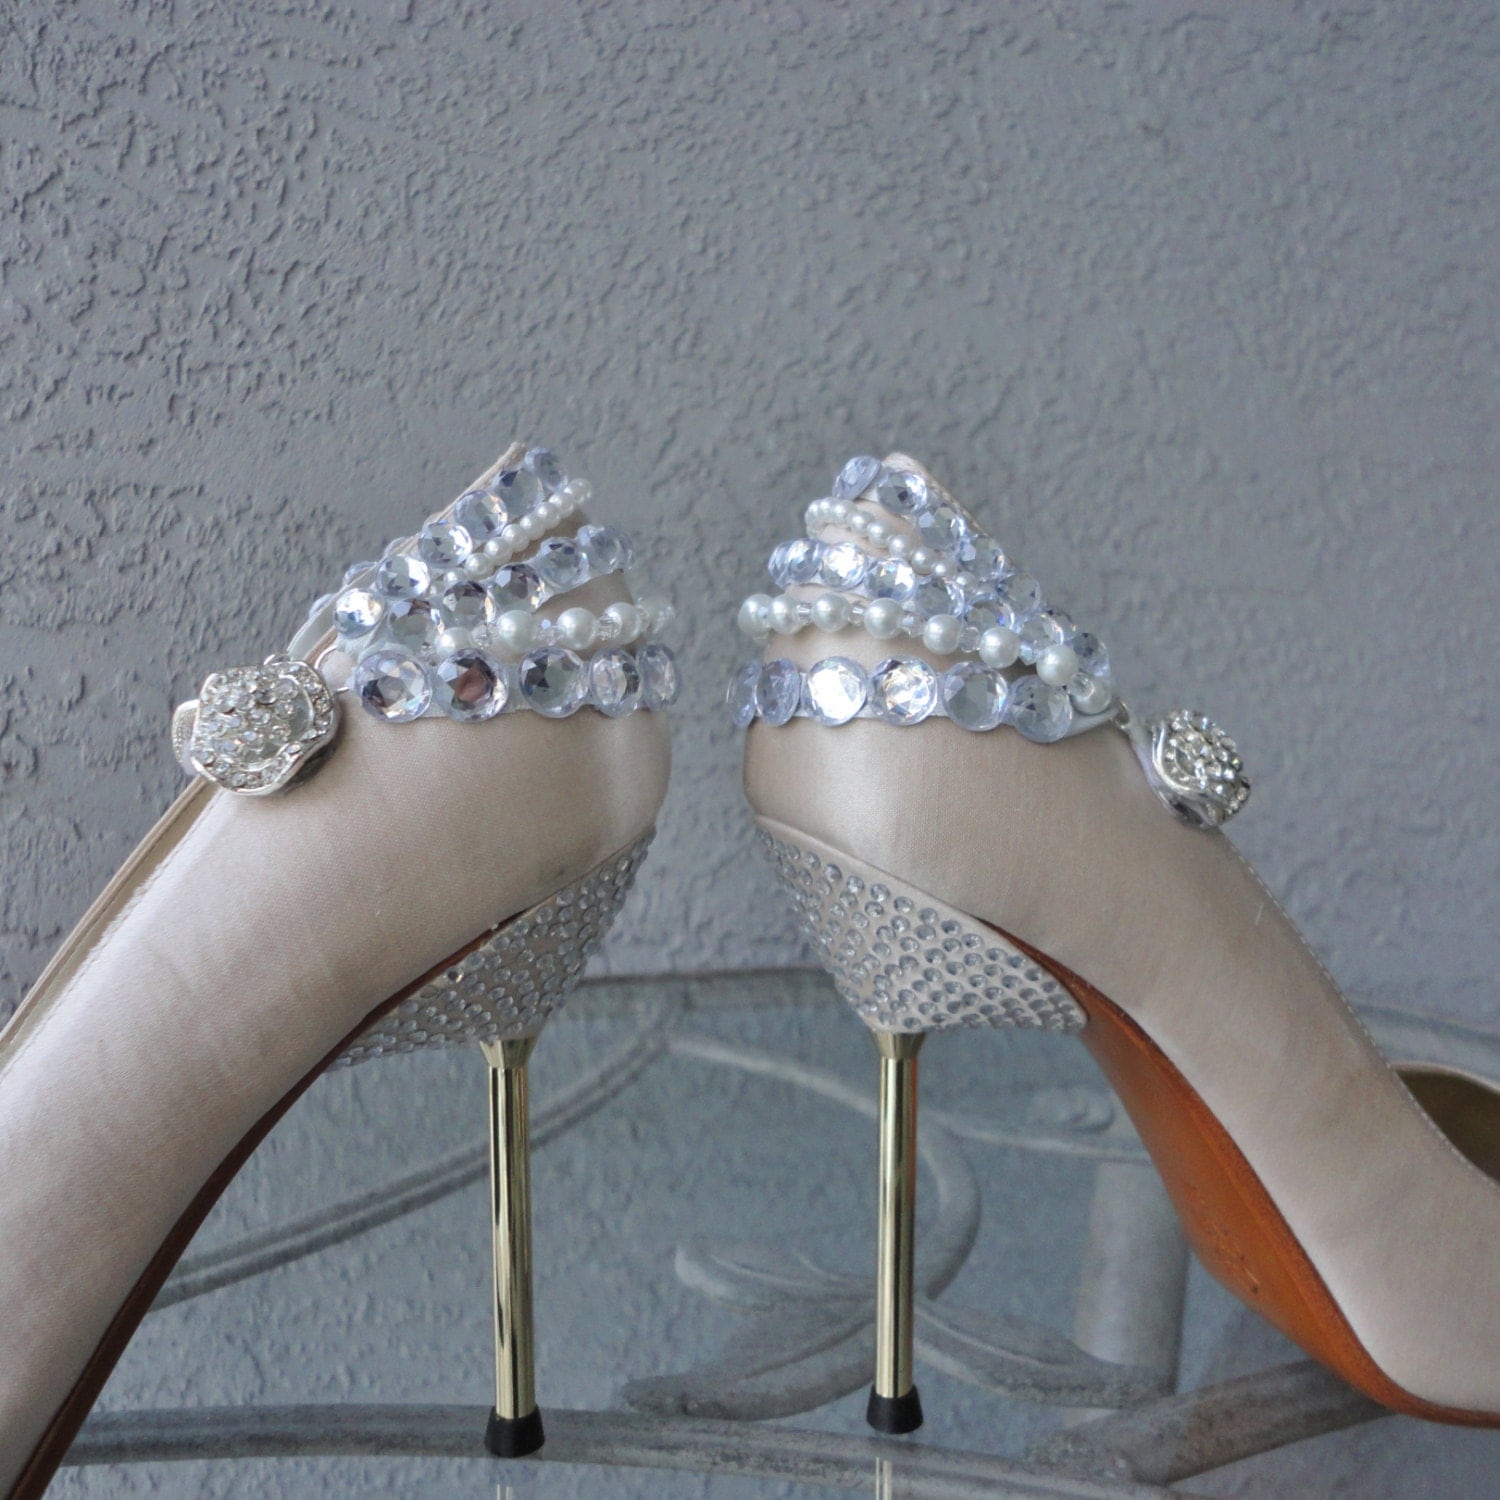 Glamorous Rhinestone And Pearl Shoe Clips For The Back Of Your